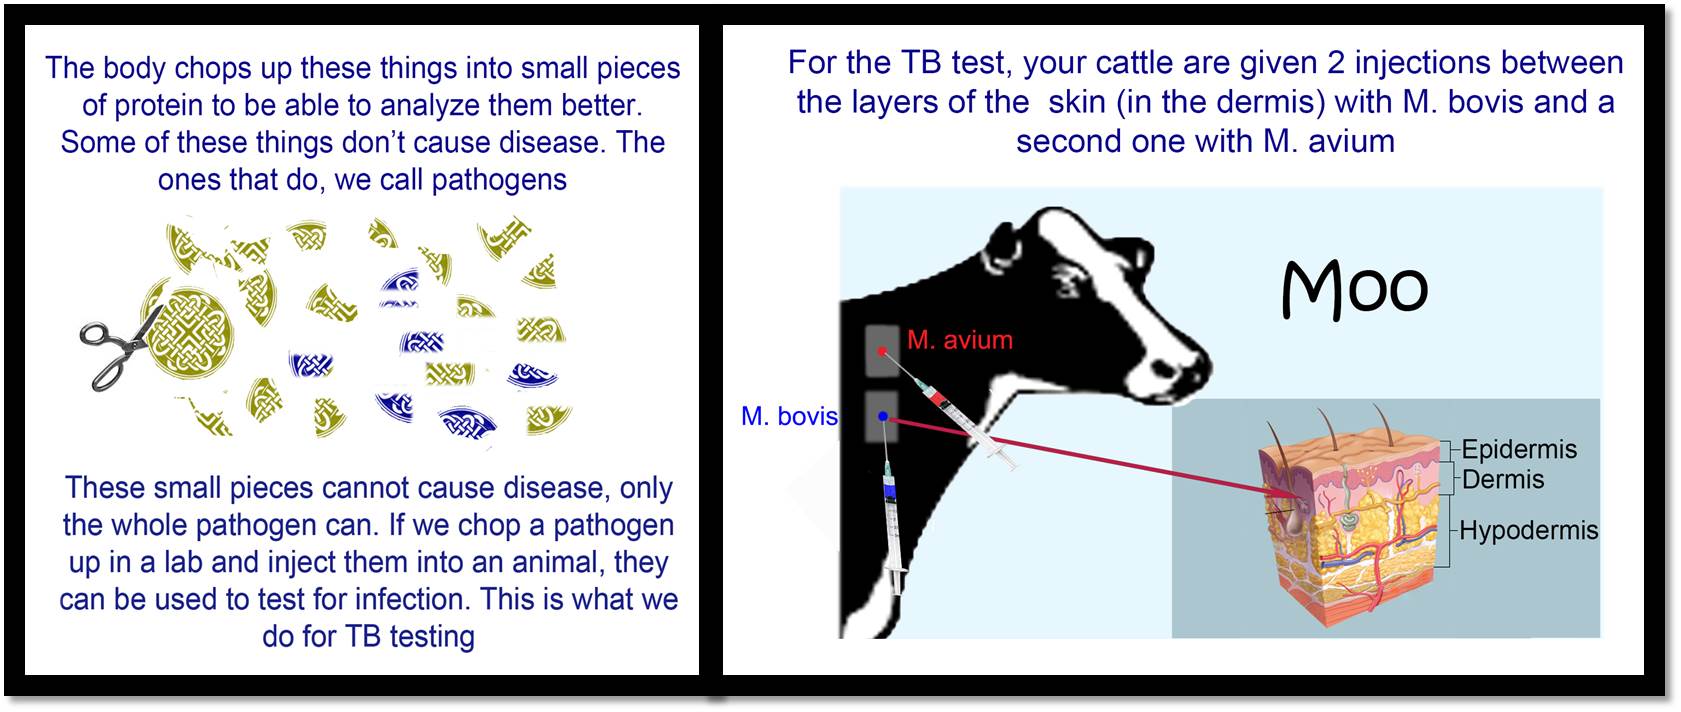 All about TB - ICBF